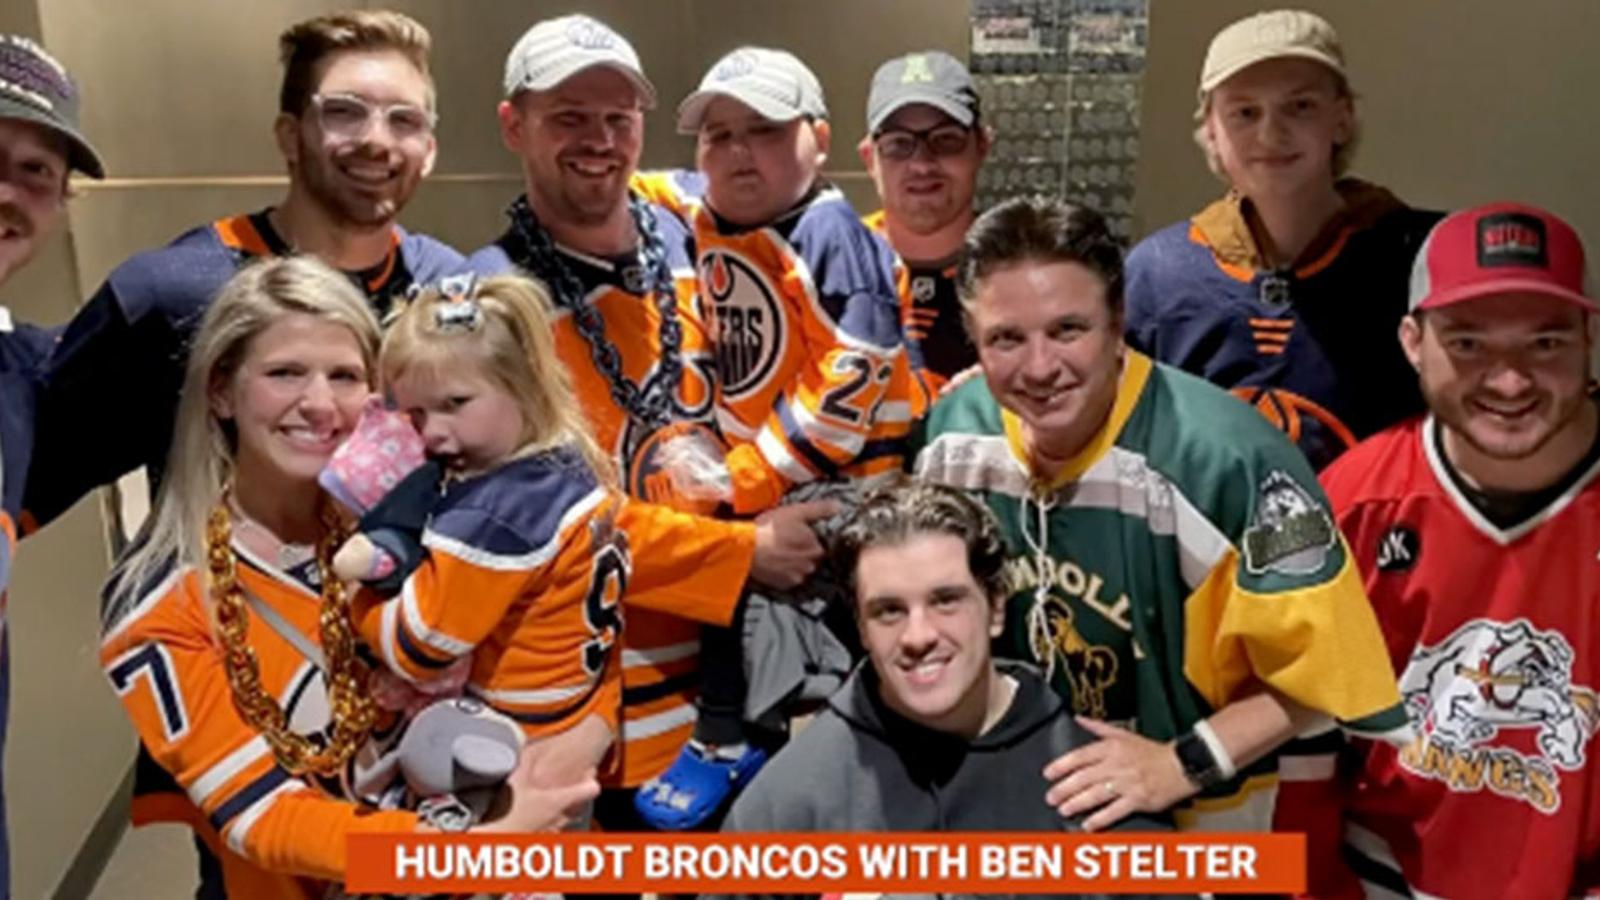 Survivors from Humboldt Broncos tragedy have a special gift for Ben Stelter and his family